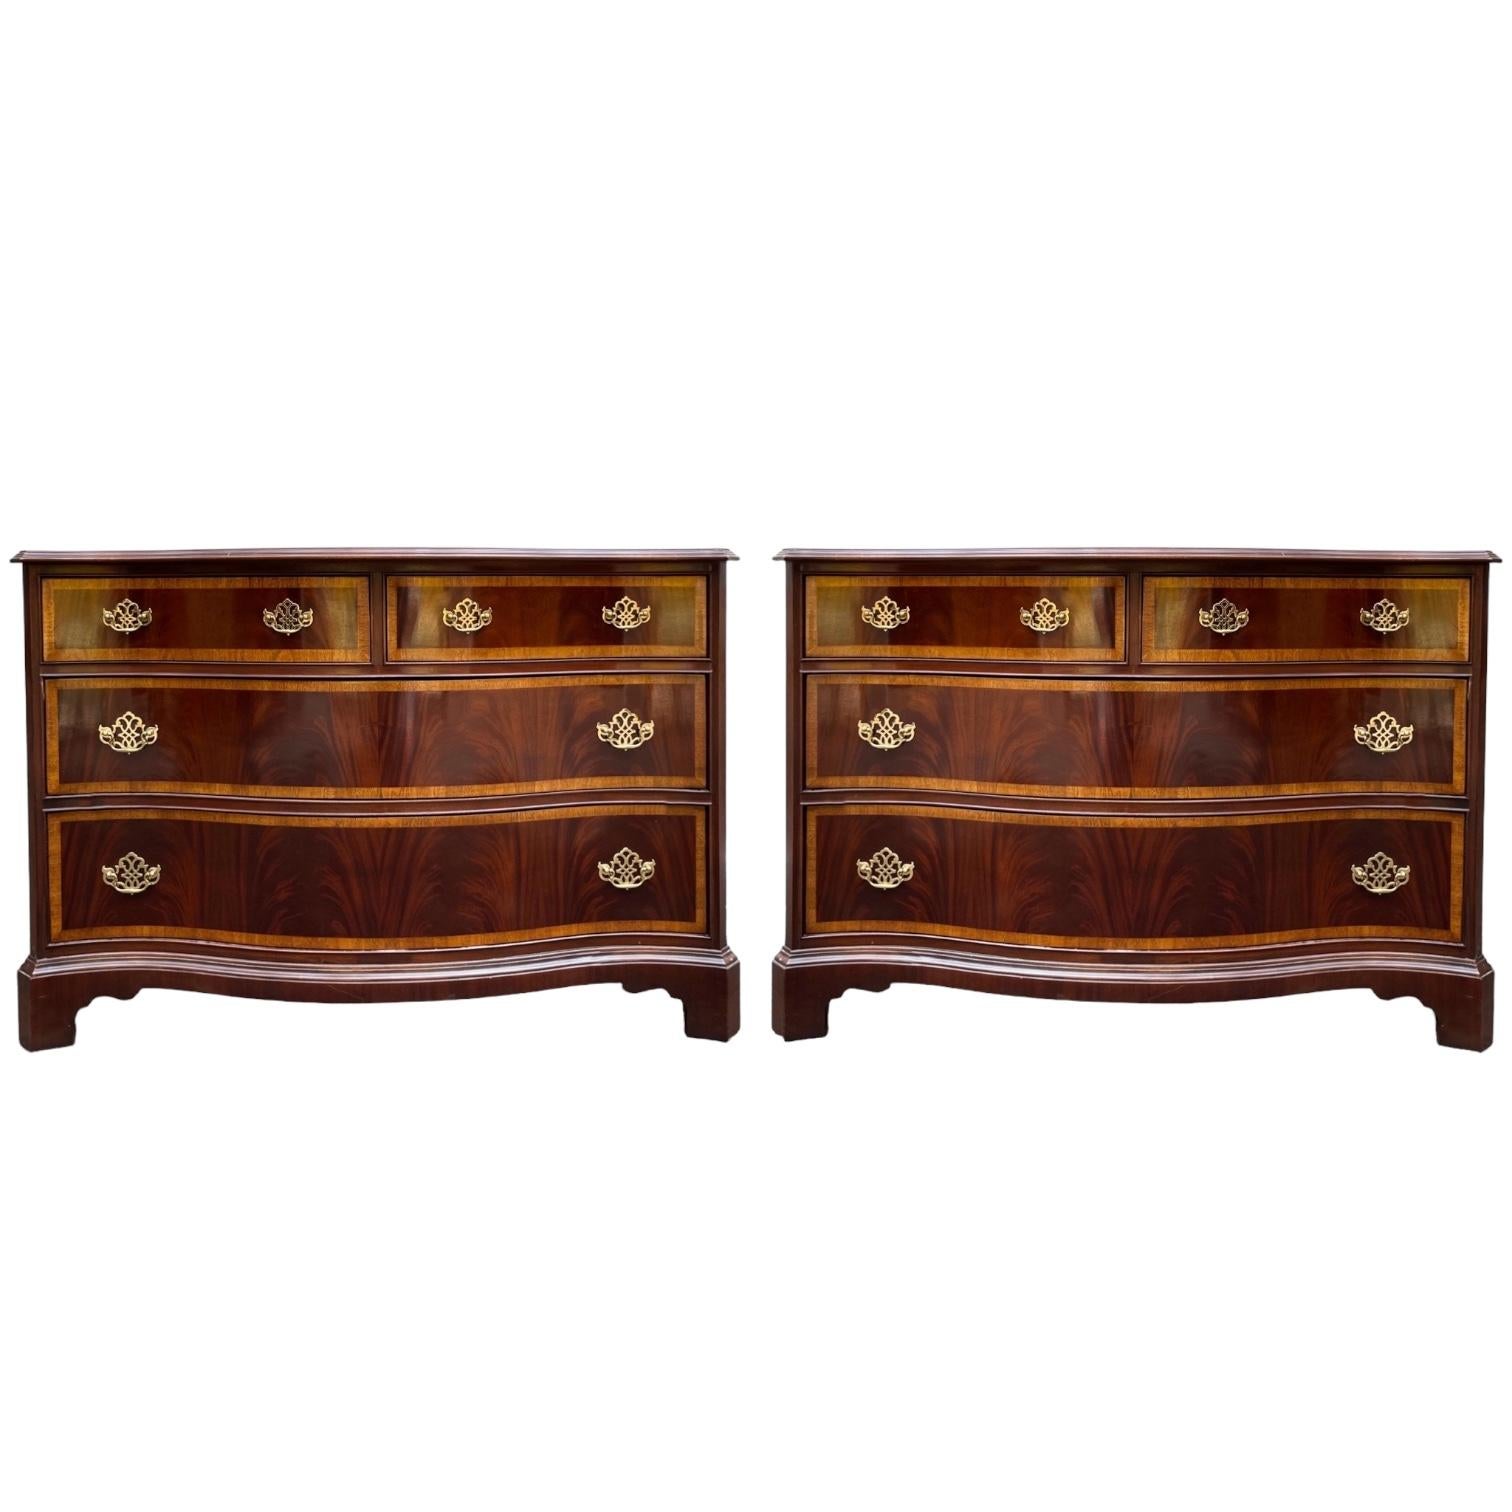 Hickory Furniture Chippendale Style Flame Mahogany Serpentine Chest - Pair For Sale 1